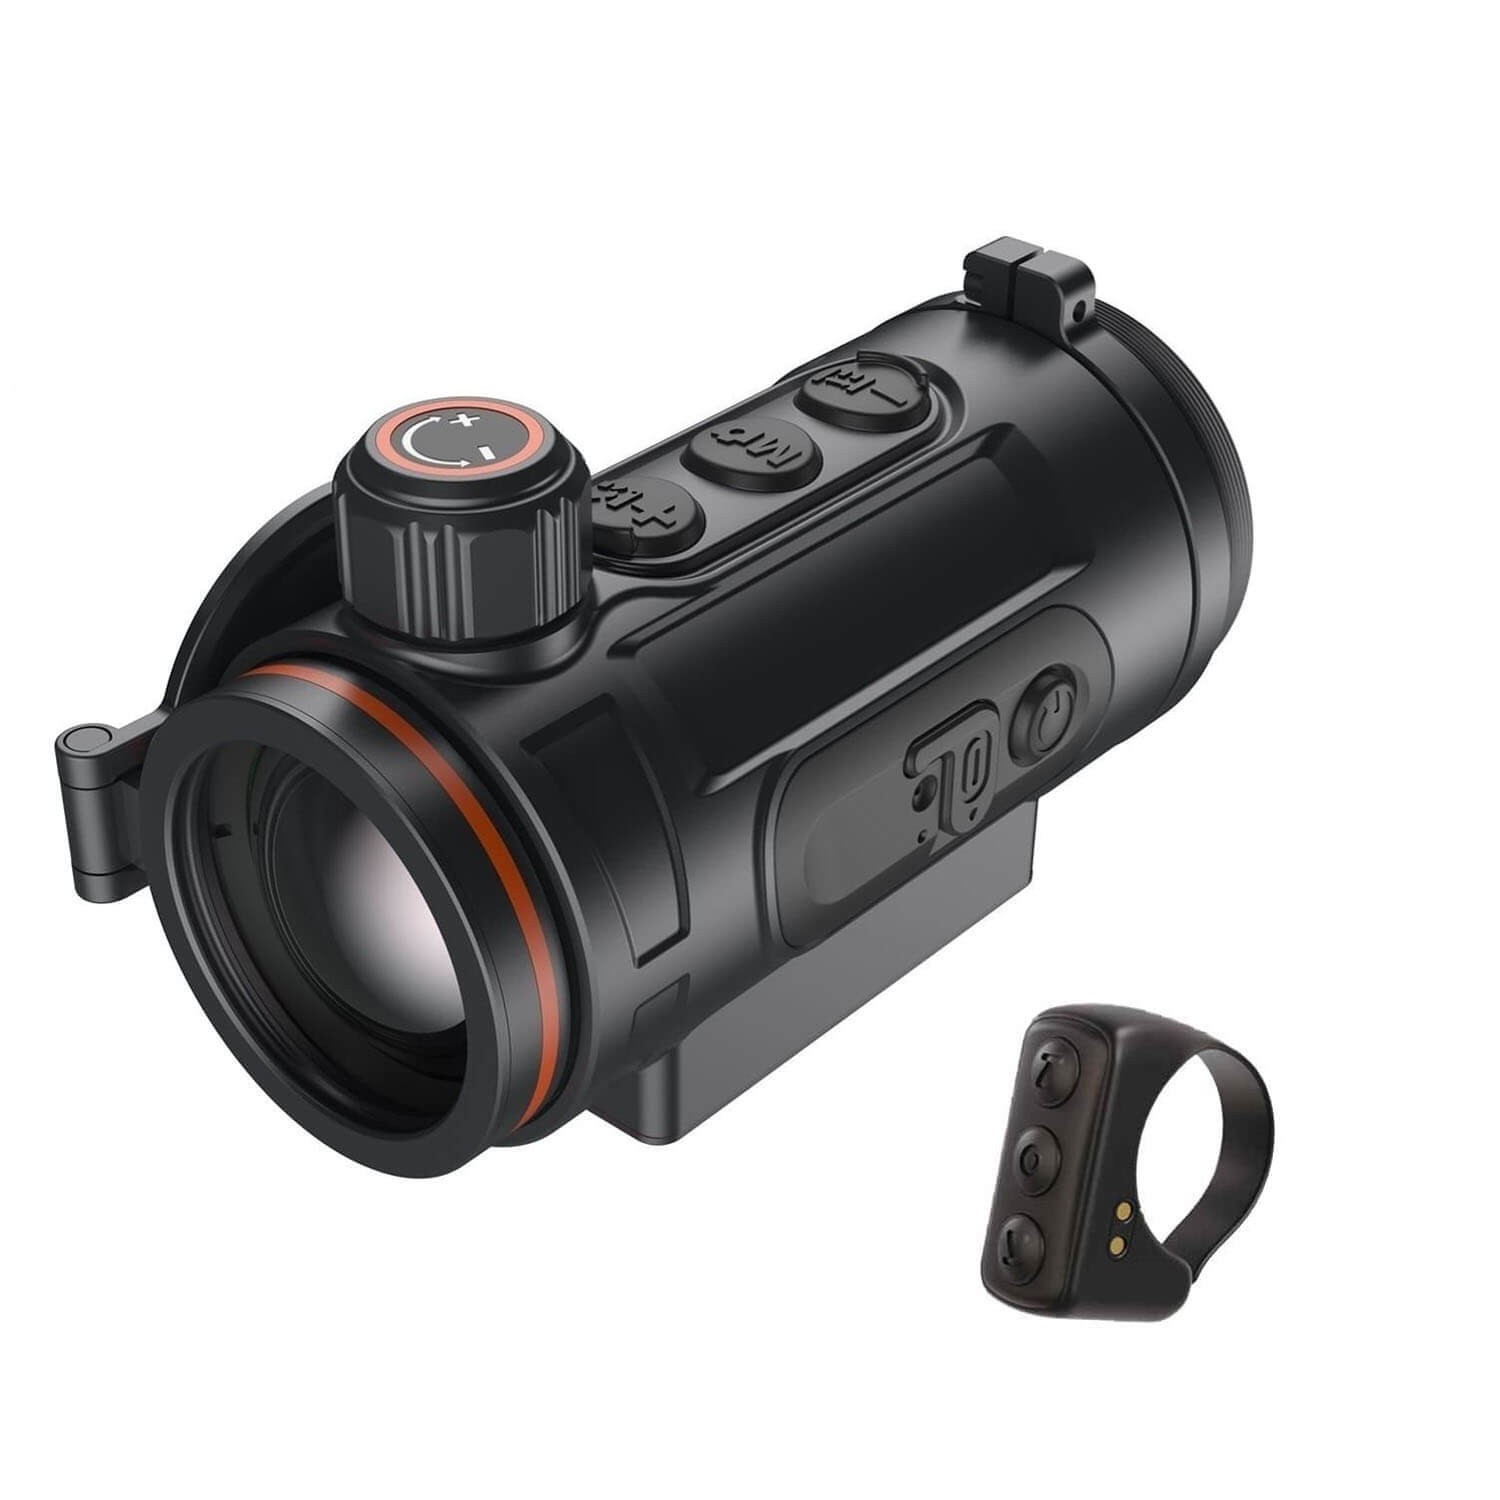 TermTec thermal imagine device Hunt 335 - Night Vision Devices